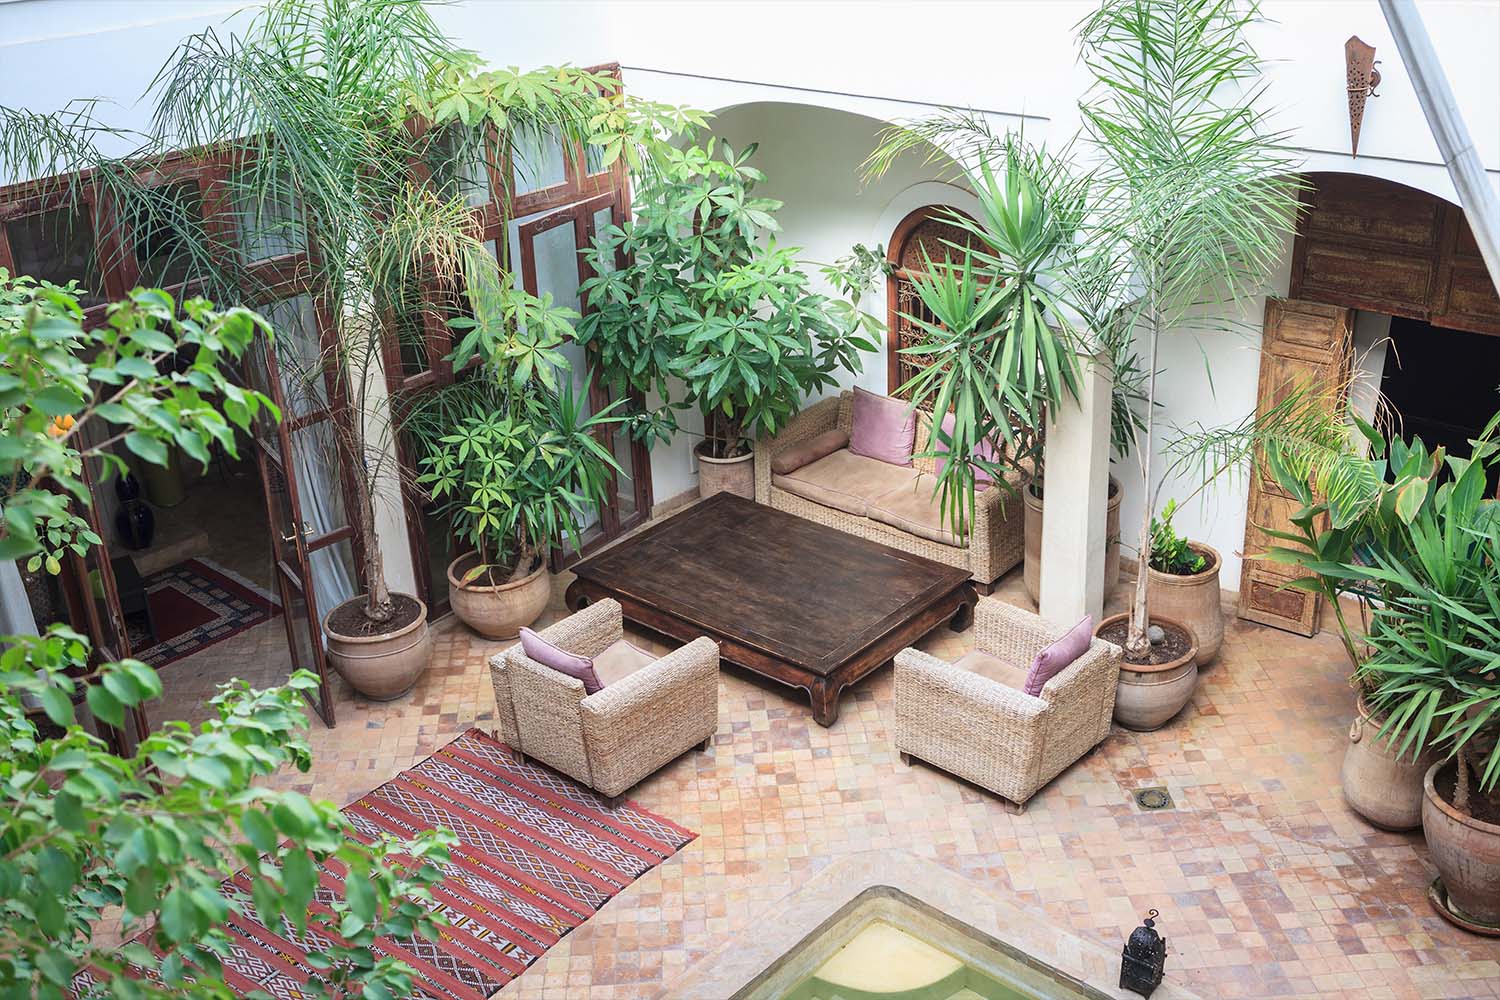 A traditional riad with an interior courtyard 